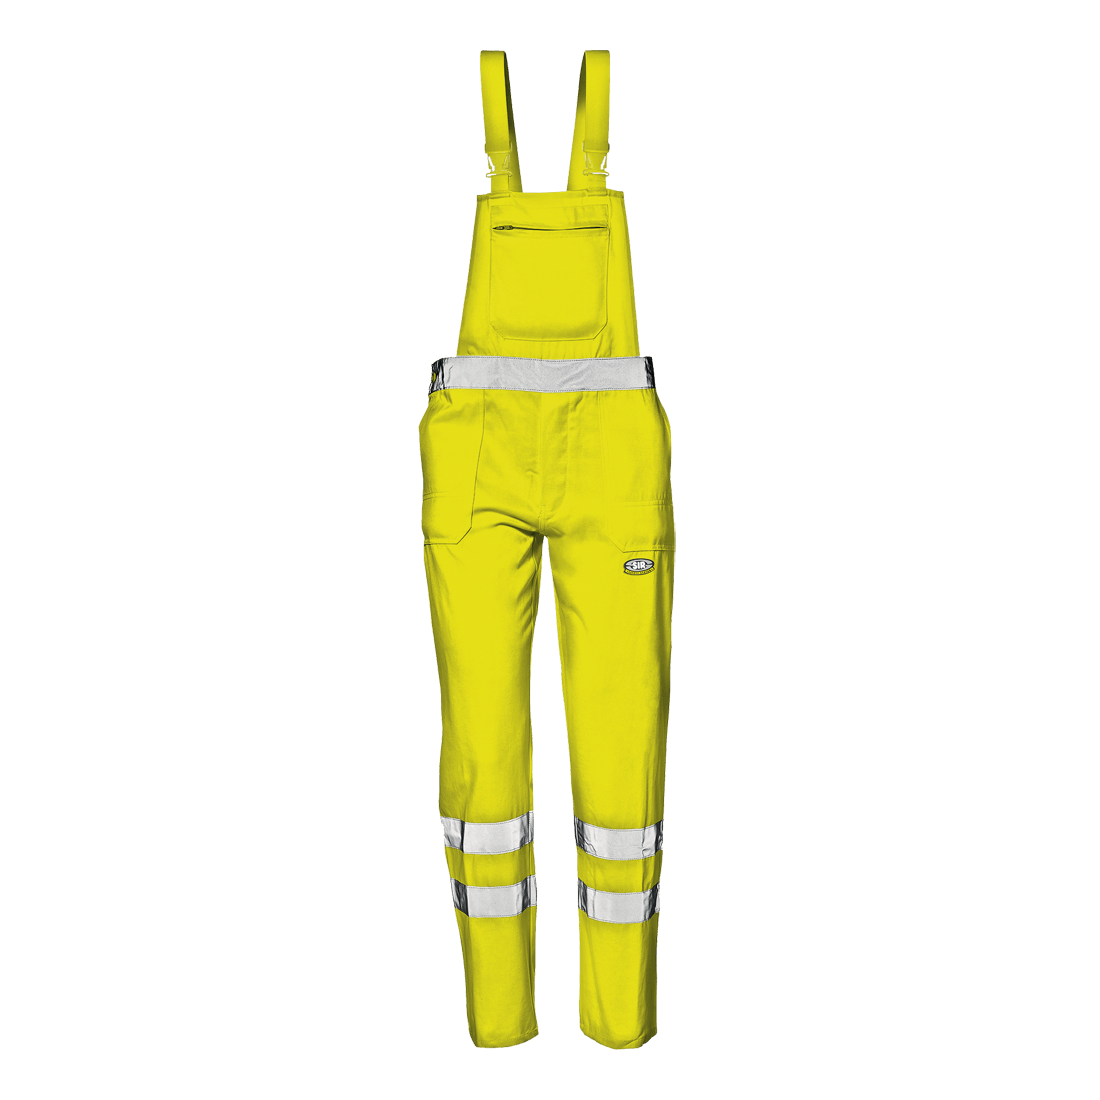 MISTRAL BIB-TROUSERS YELLOW – Sir Safety